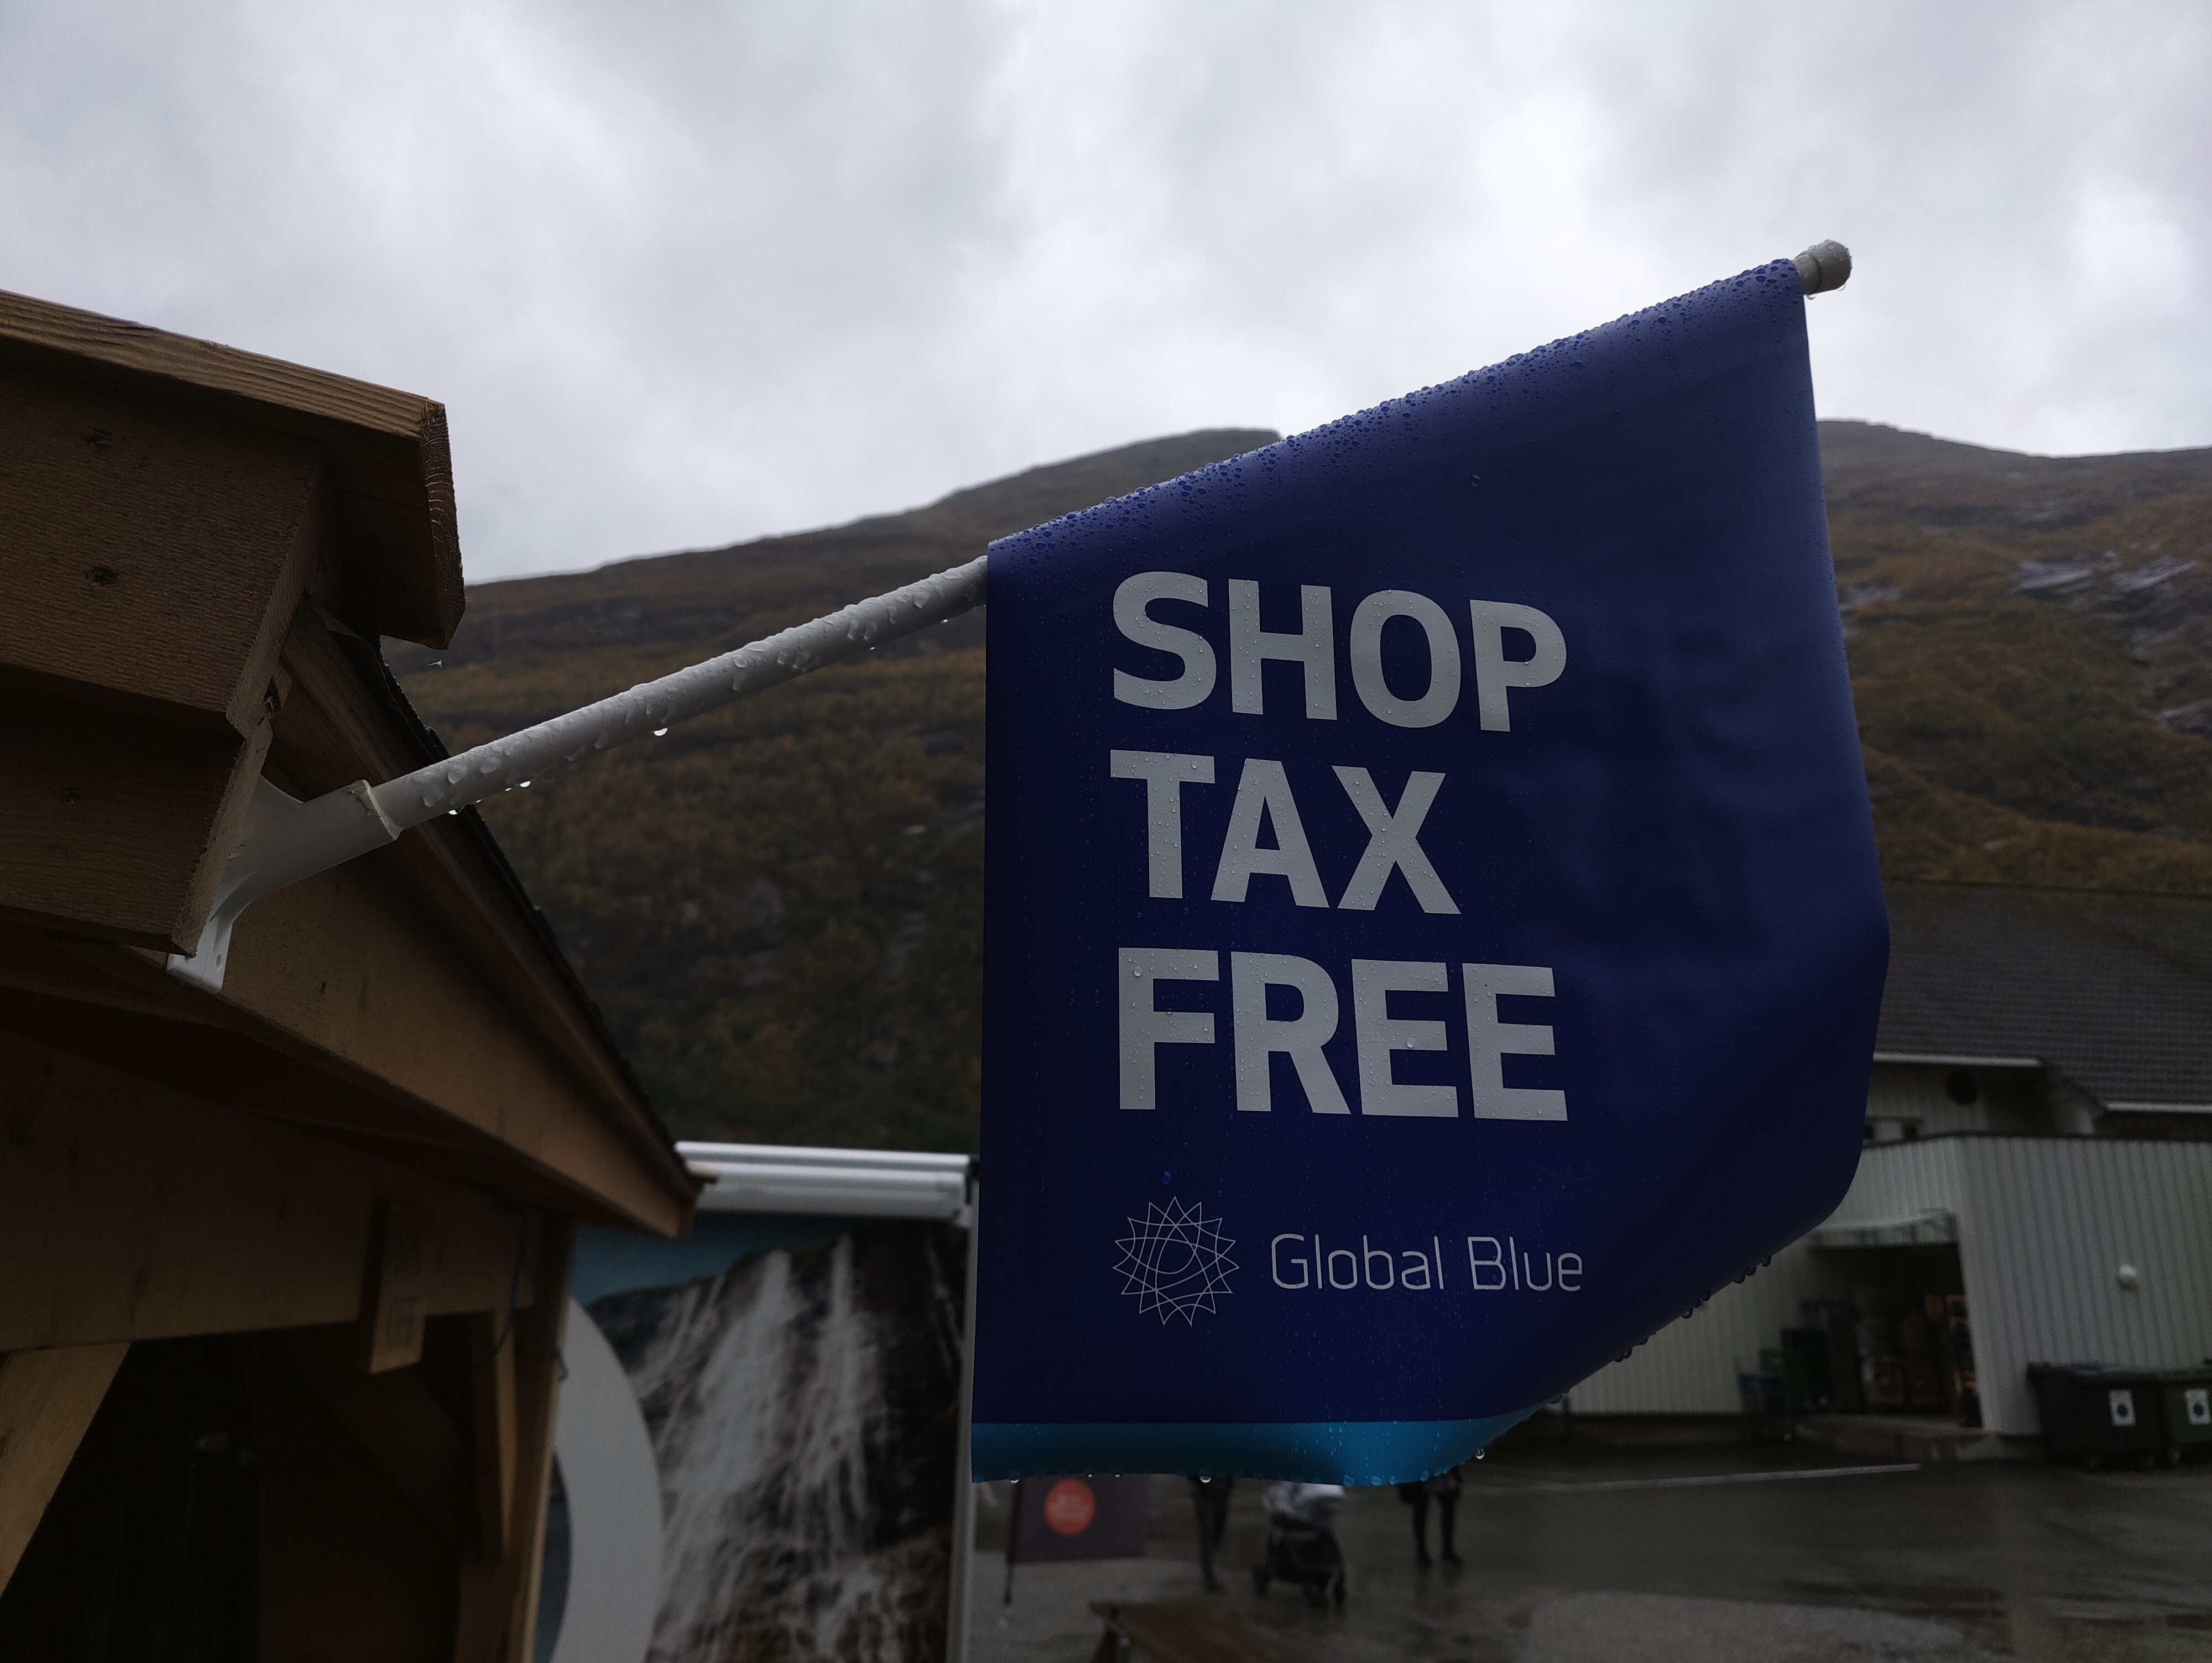 Other advantages of being a Tax Resident in Andorra - Tax Free